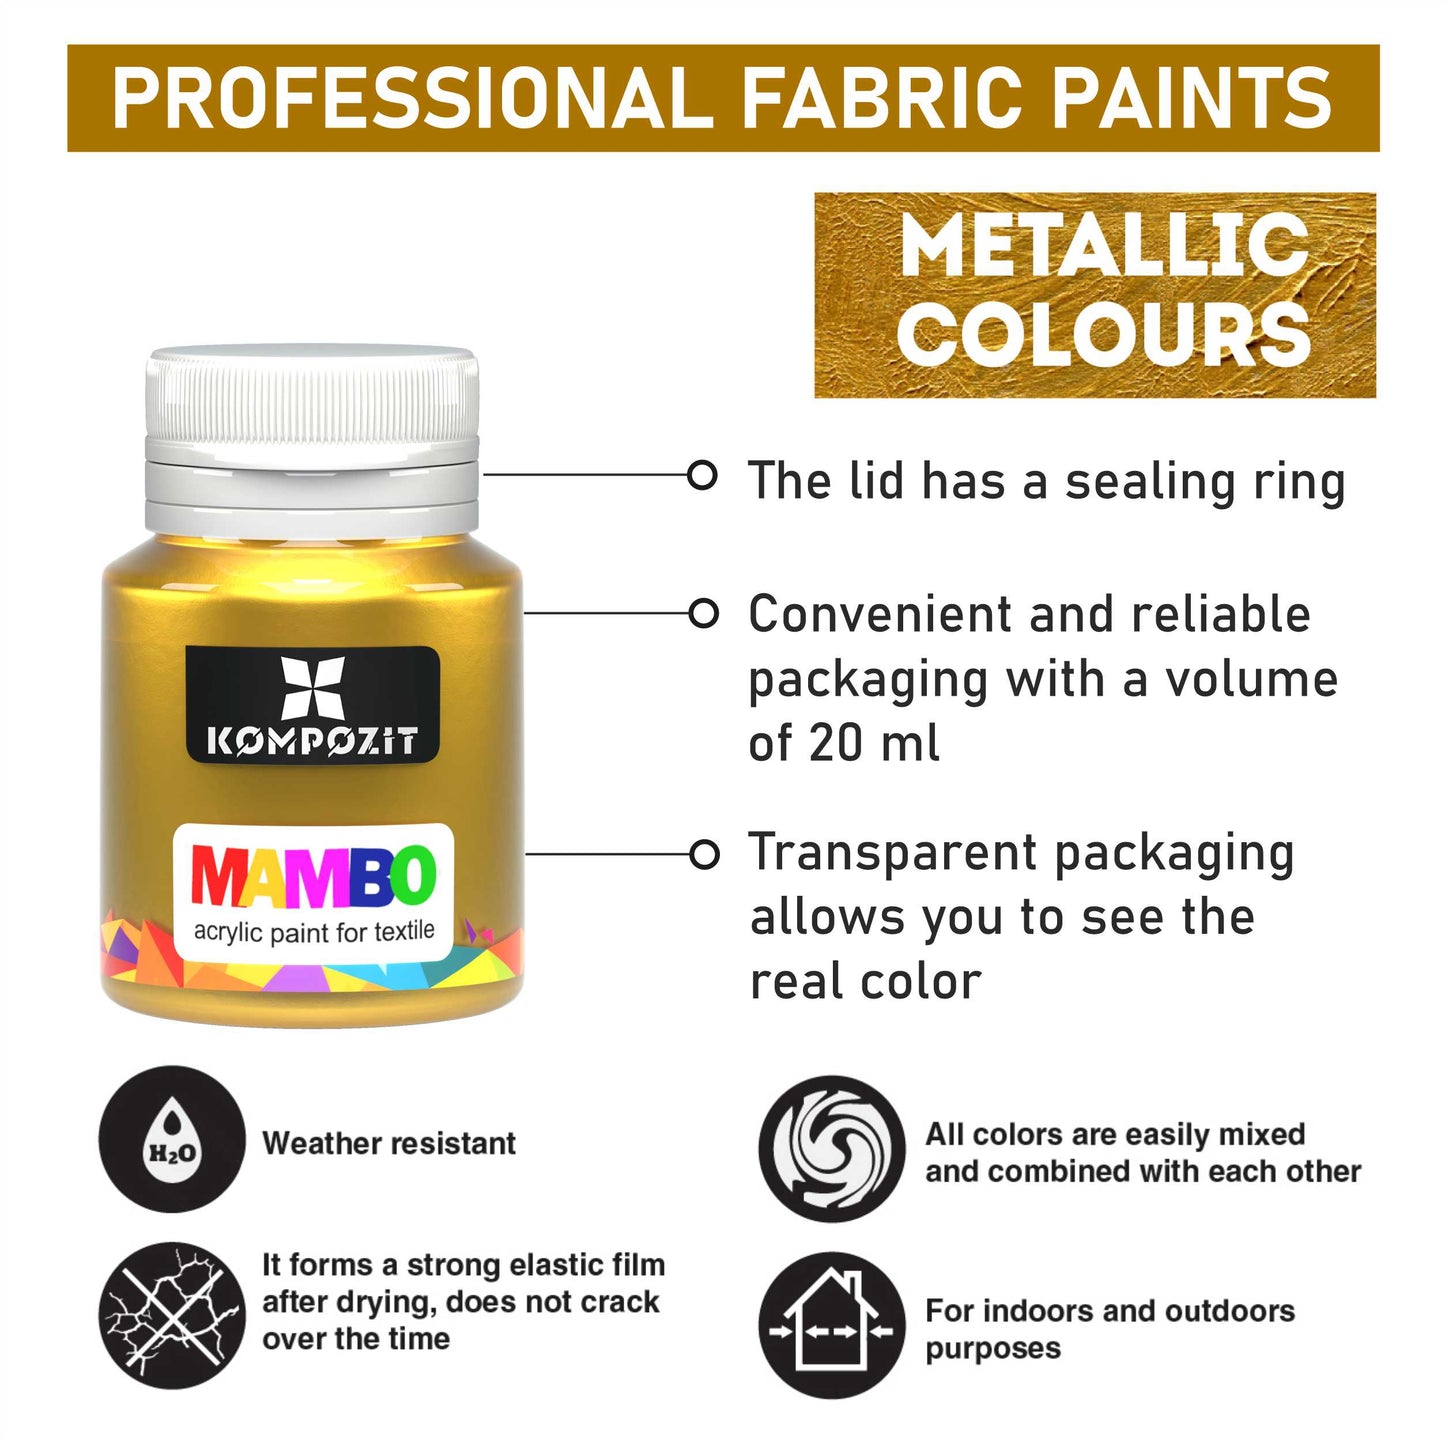 Metallic Acrylic Fabric Paint Set 9 x 20 ml (0.67 Fl Oz) For Clothes, Textile, Sneakers. Made in Europe